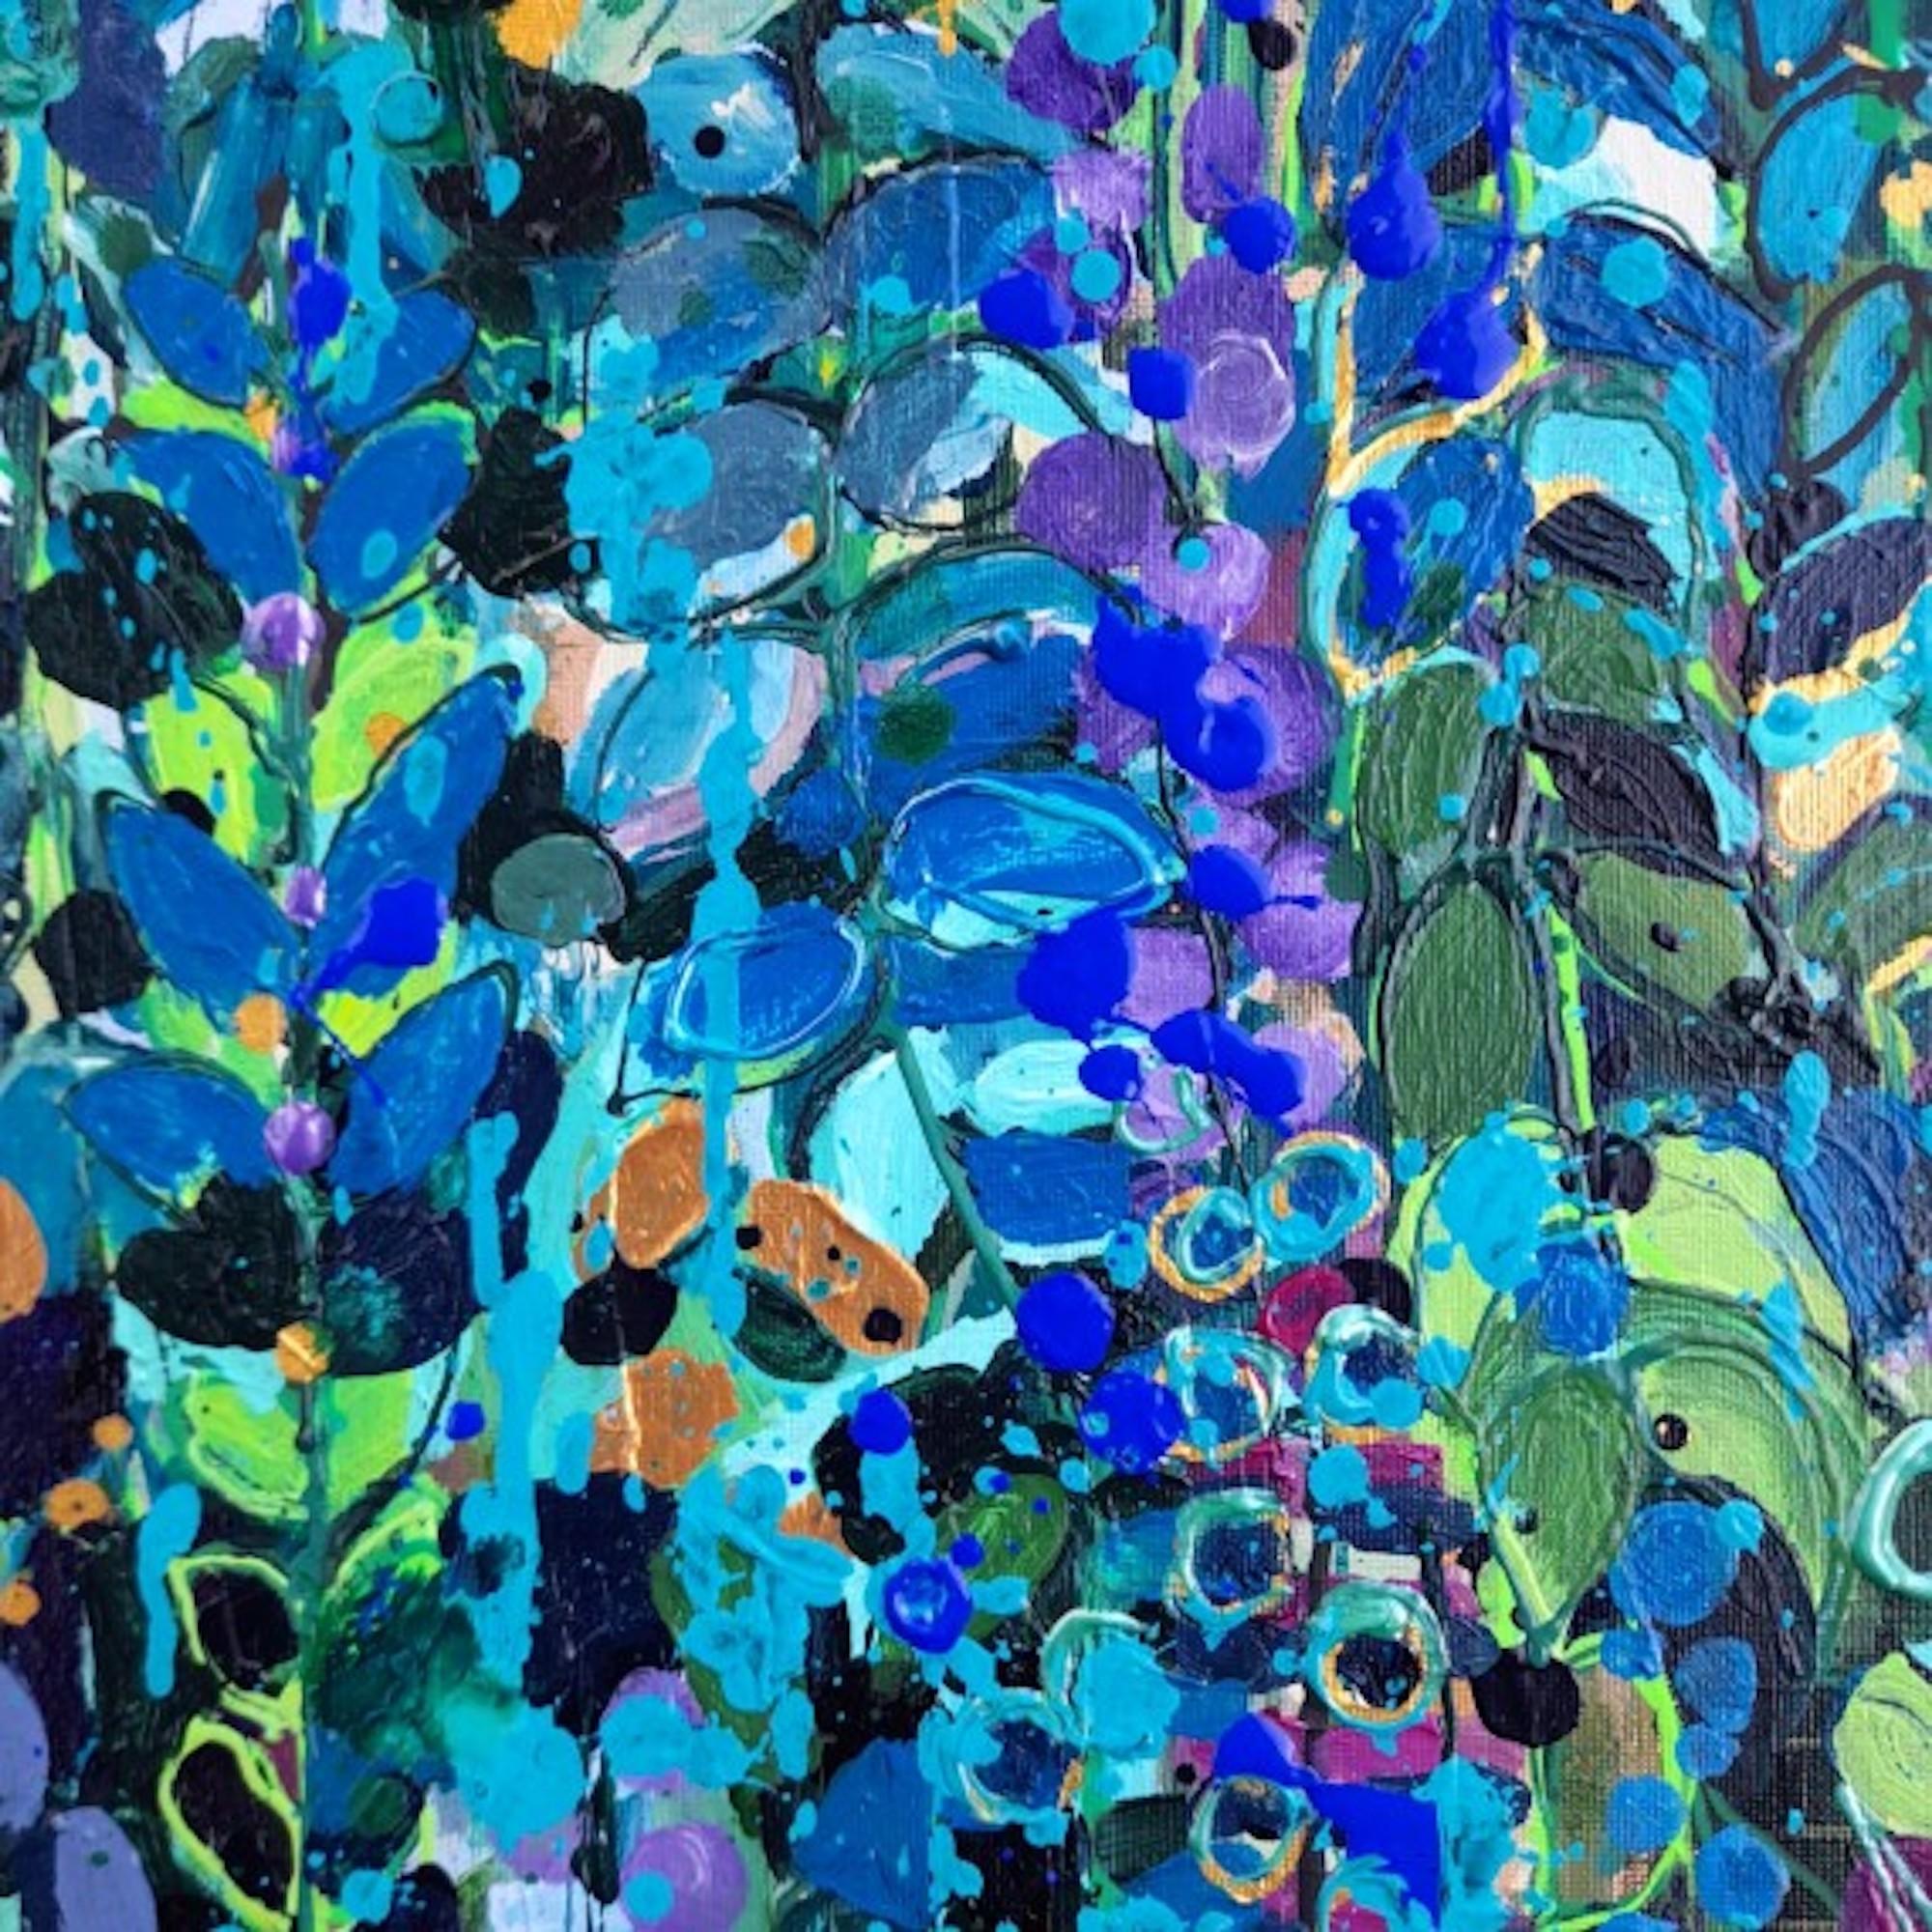 Purple & Blue Tangle, Vibrant Floral Painting, Artwork Inspired by Nature 2